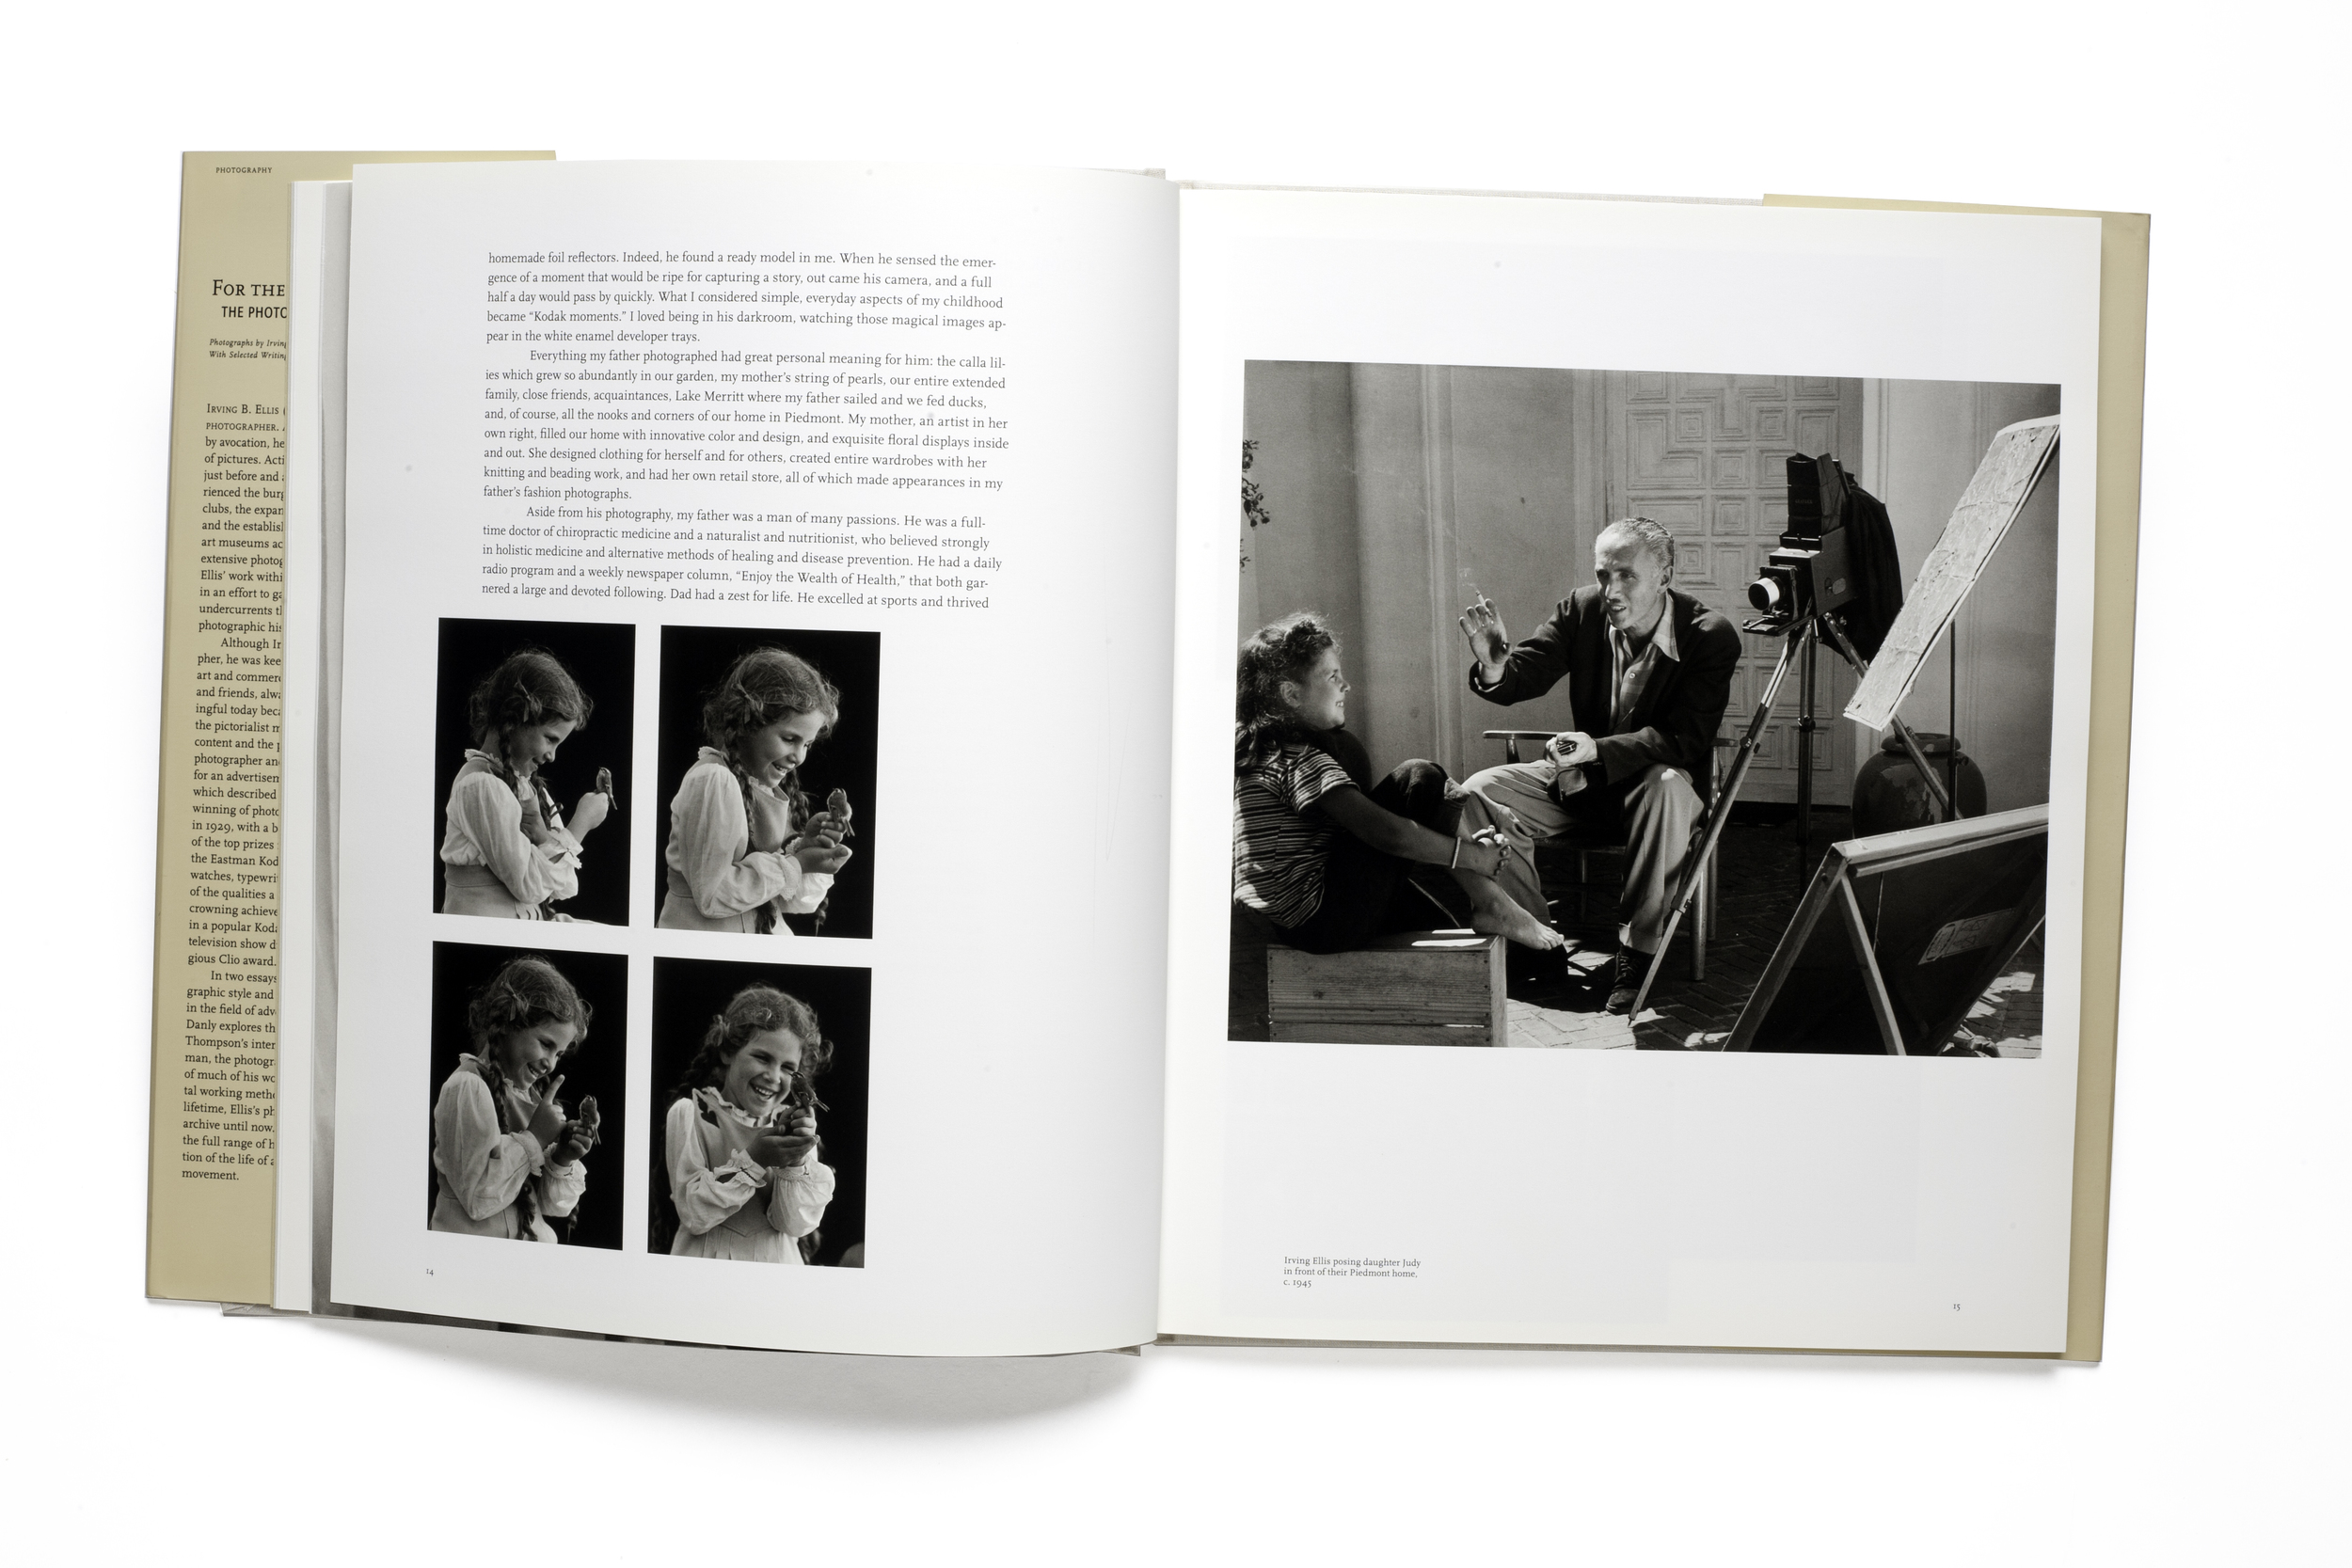   For The Love of It:&nbsp;   The Photography of Irving Bennett Ellis    Pages 14-15  